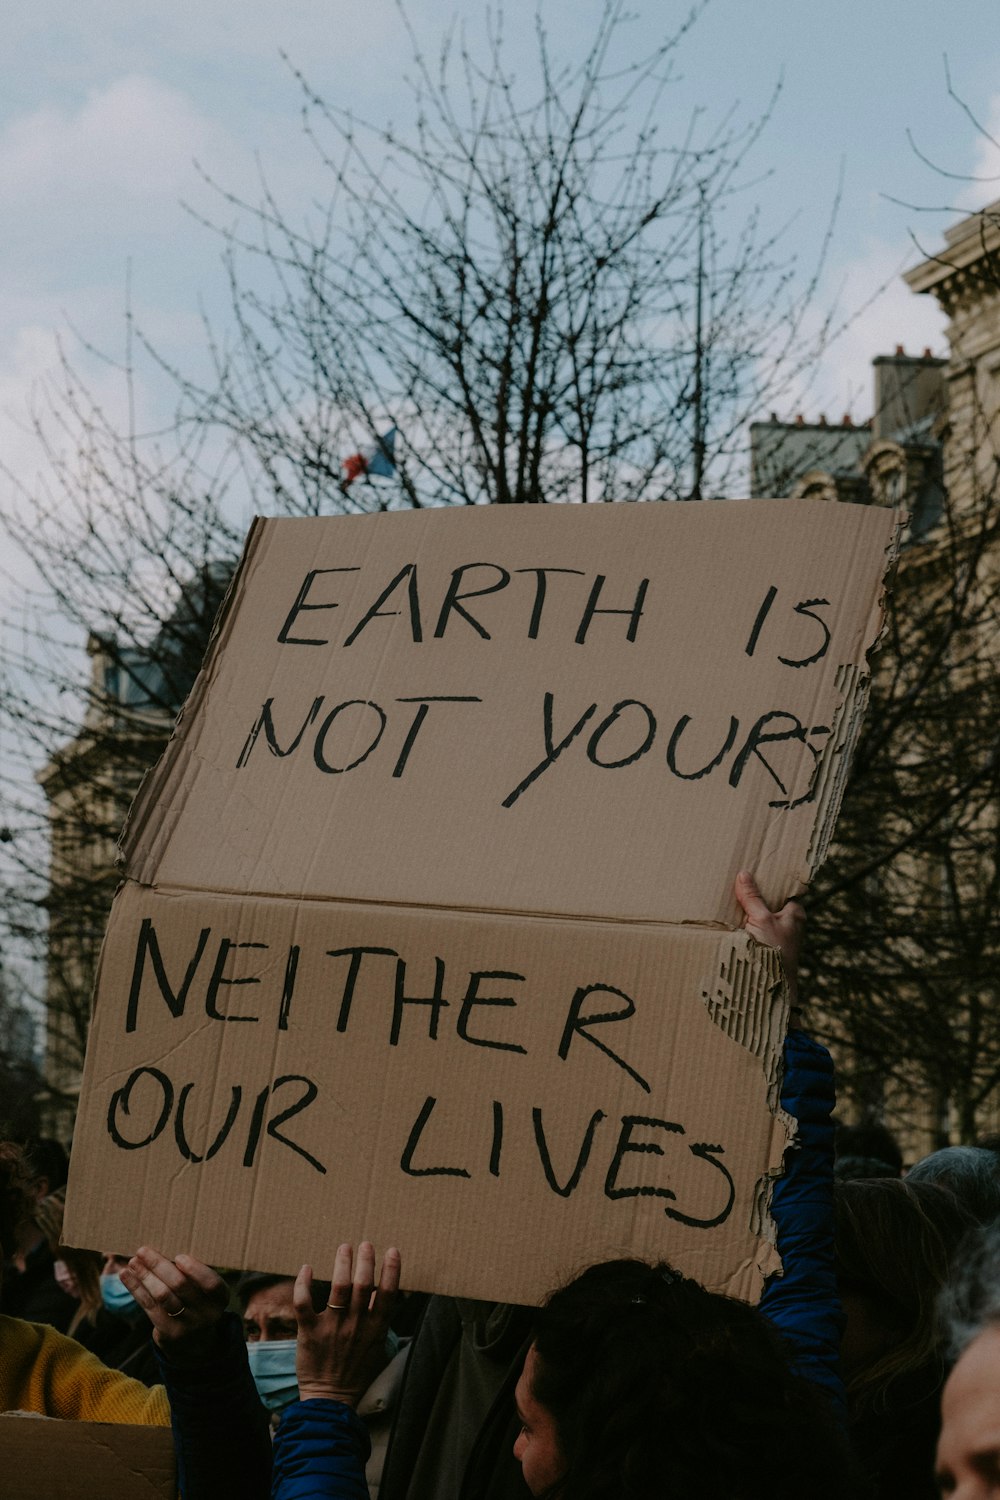 a group of people holding a sign that says earth is not your nether lives